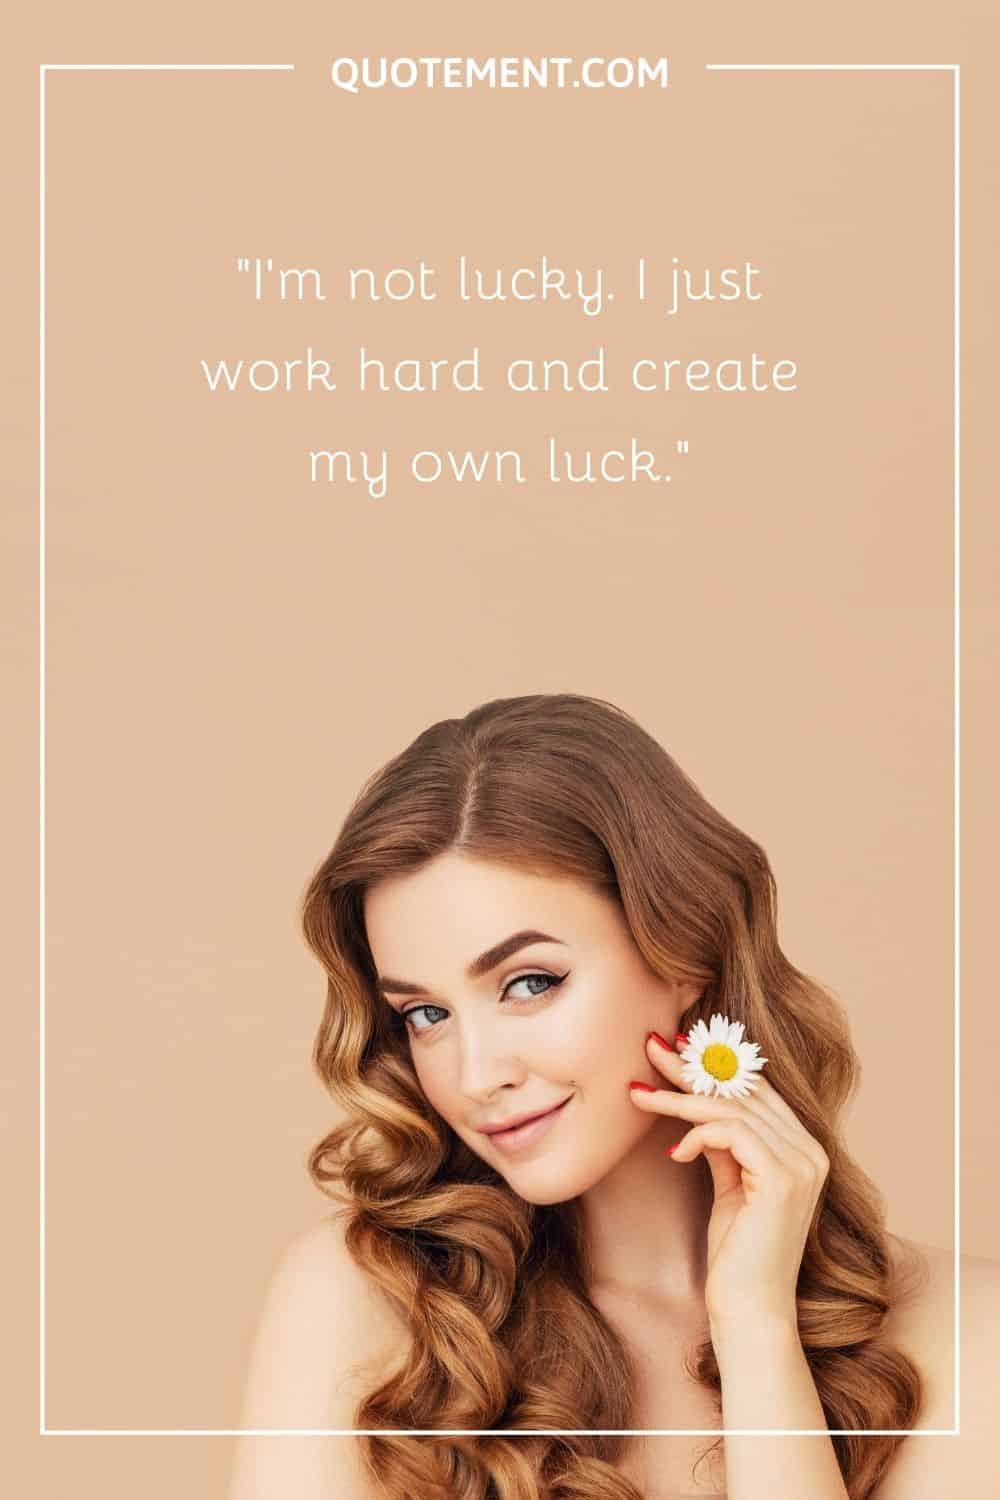 I just work hard and create my own luck.